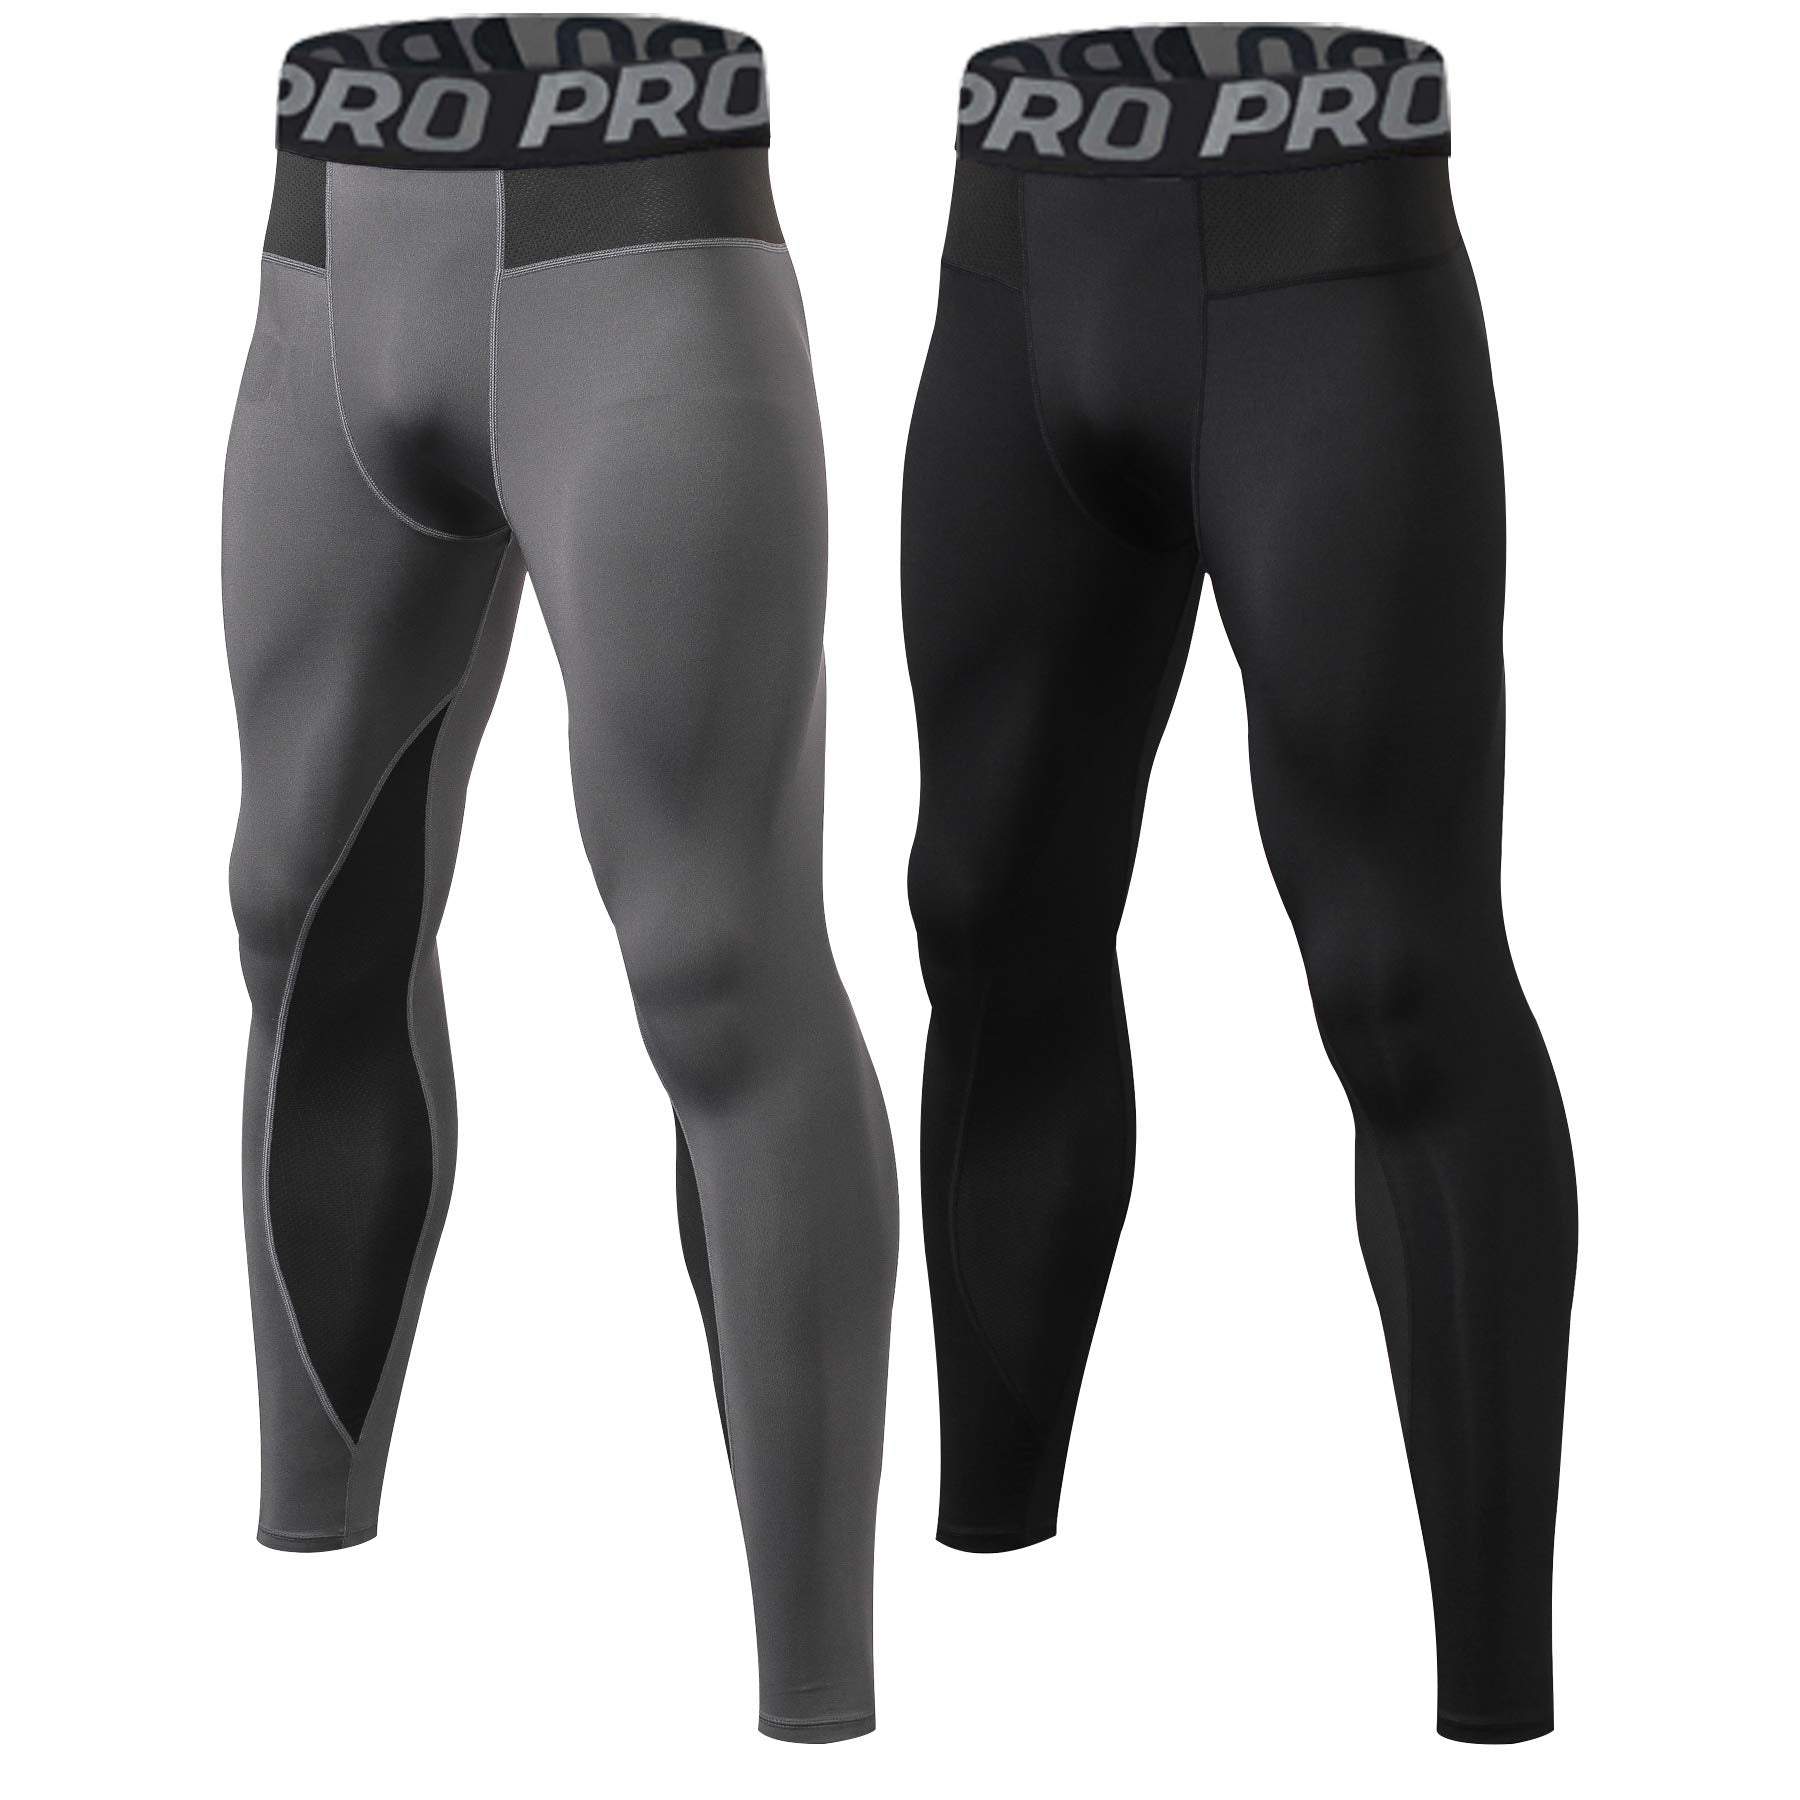 2 Pack Men Compression Pants Running Tights Male Workout Leggings Athletic Cool Dry Yoga Gym Clothes LANBAOSI 183